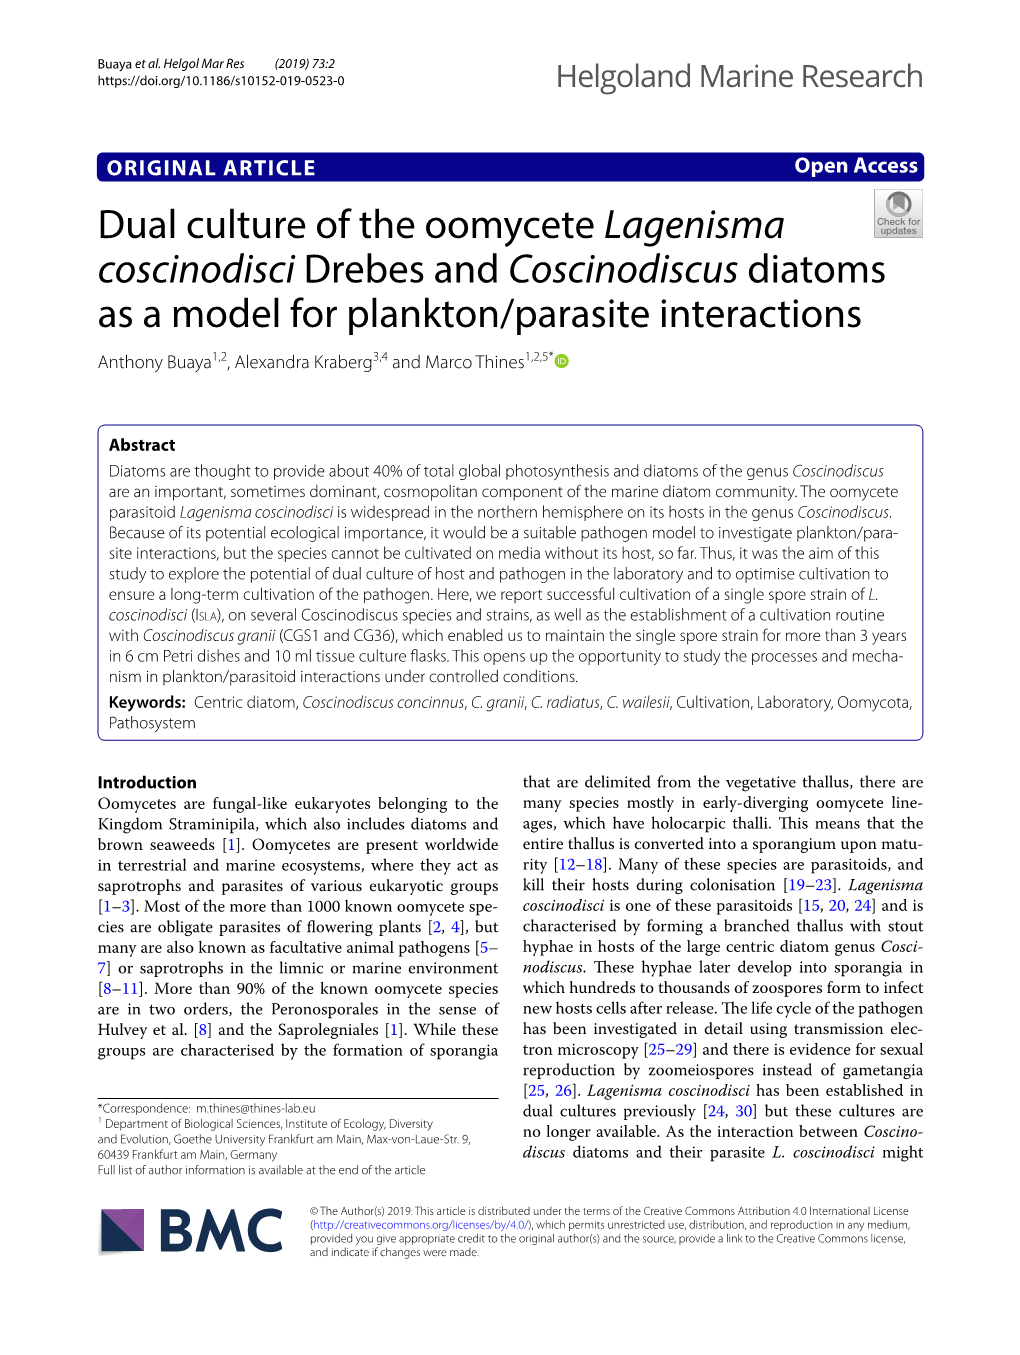 Dual Culture of the Oomycete Lagenisma Coscinodisci Drebes and Coscinodiscus Diatoms As a Model for Plankton/Parasite Interactio